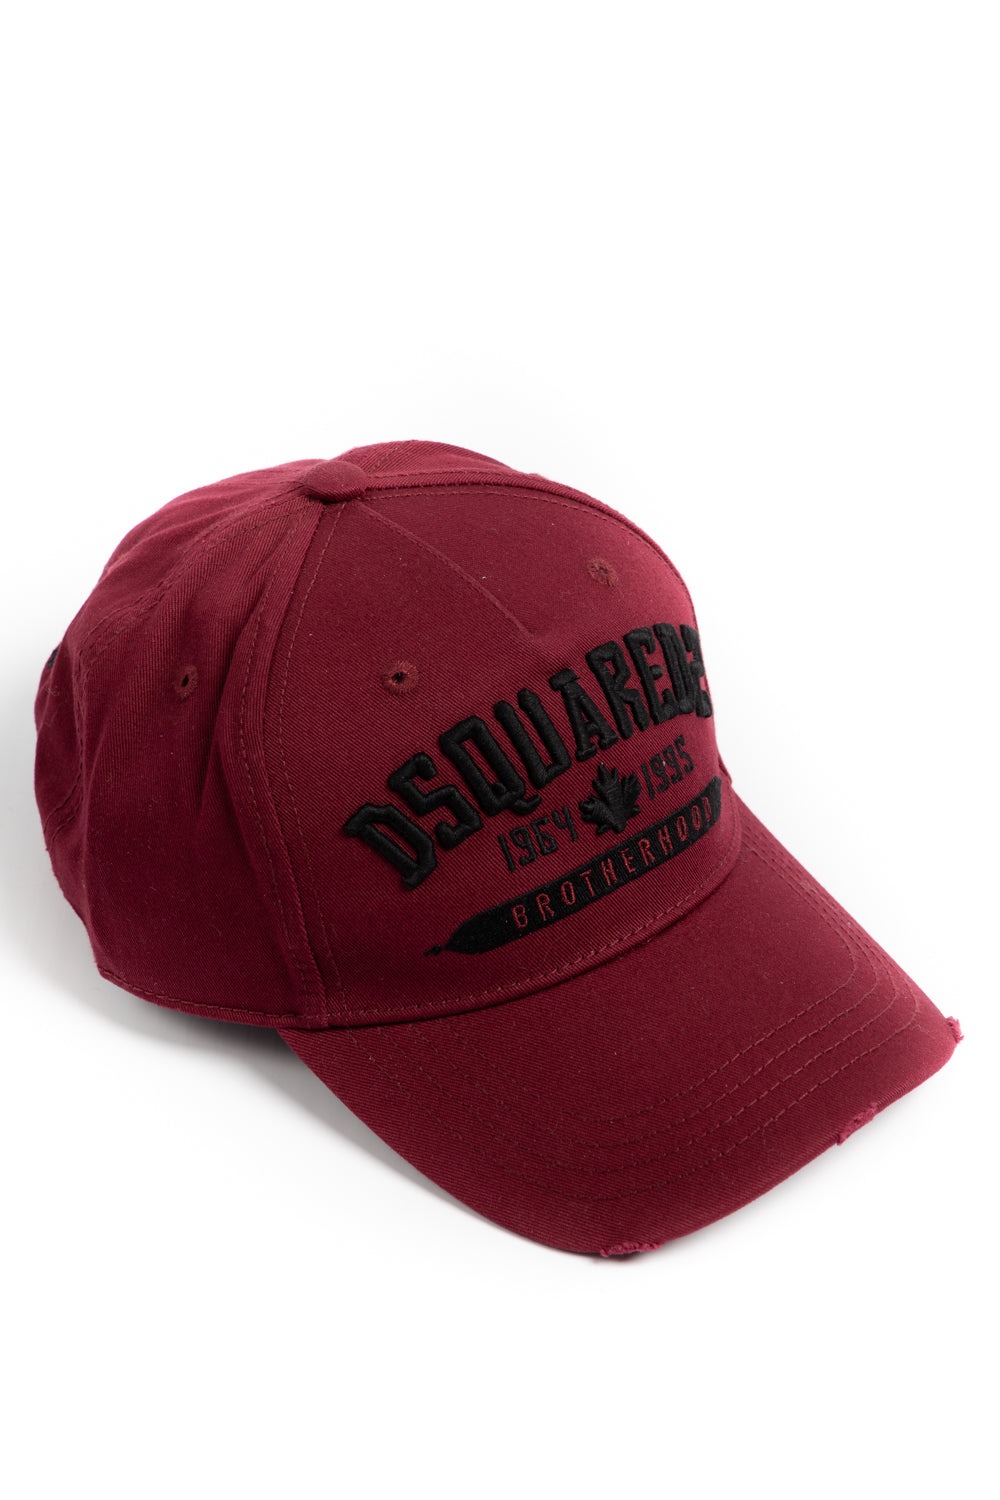 Dsquared2 Baseball Cap - Brands Off - Buy Online Luxury Clothing - Fashion Online Shop - Outlet Price